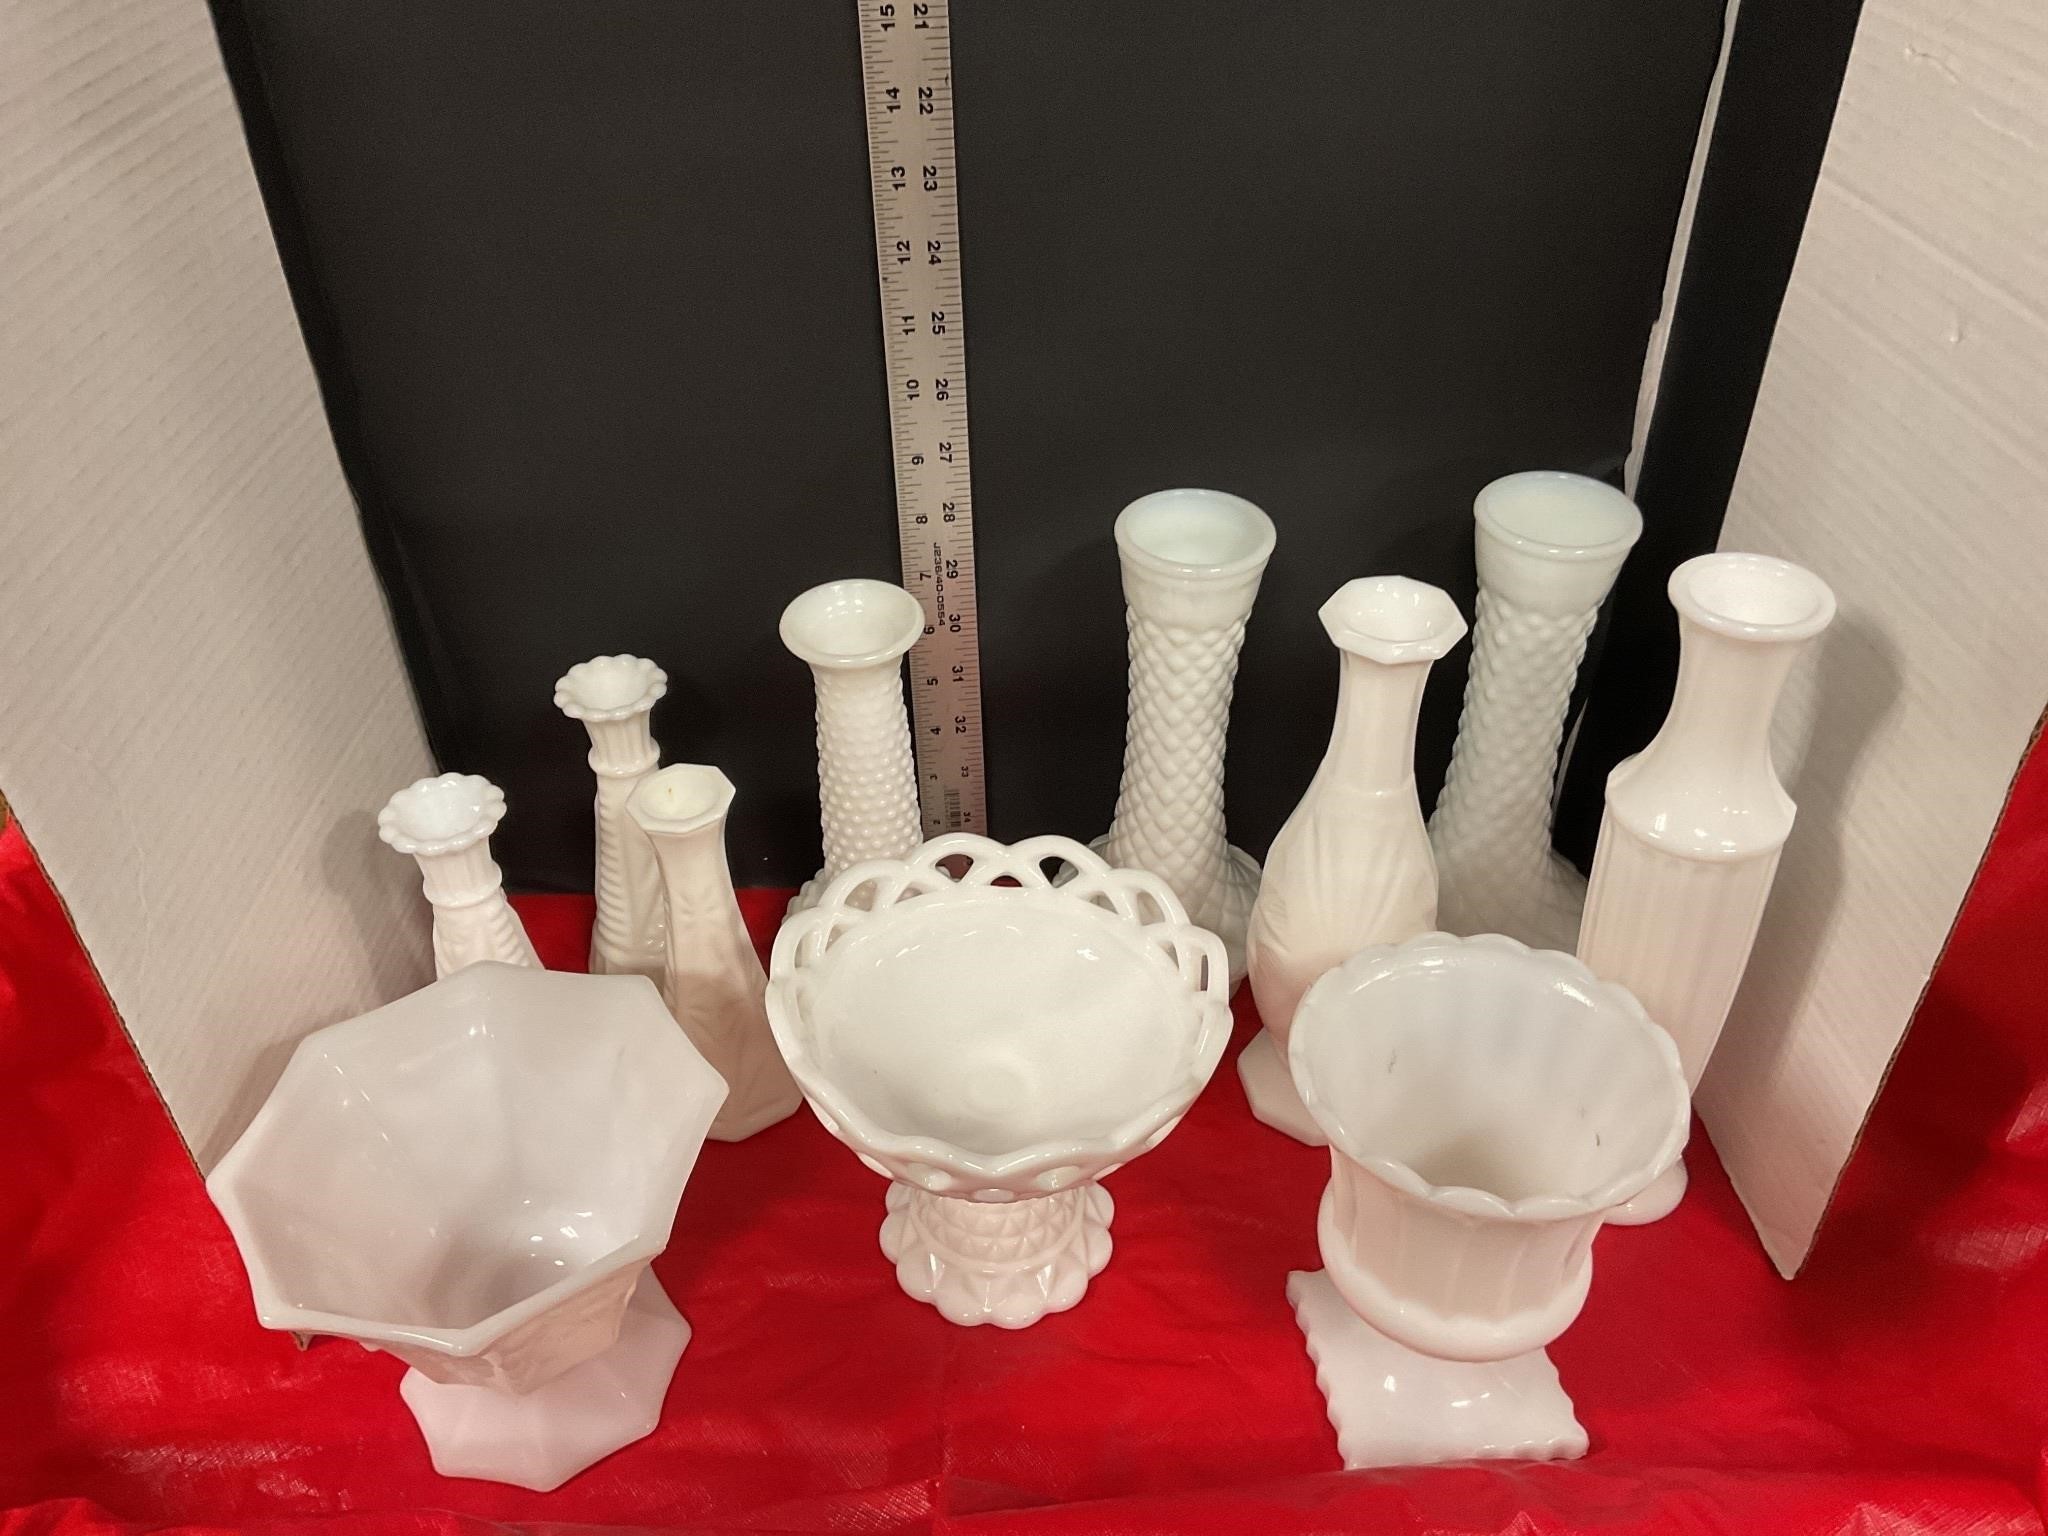 Milk glass vases and bowls